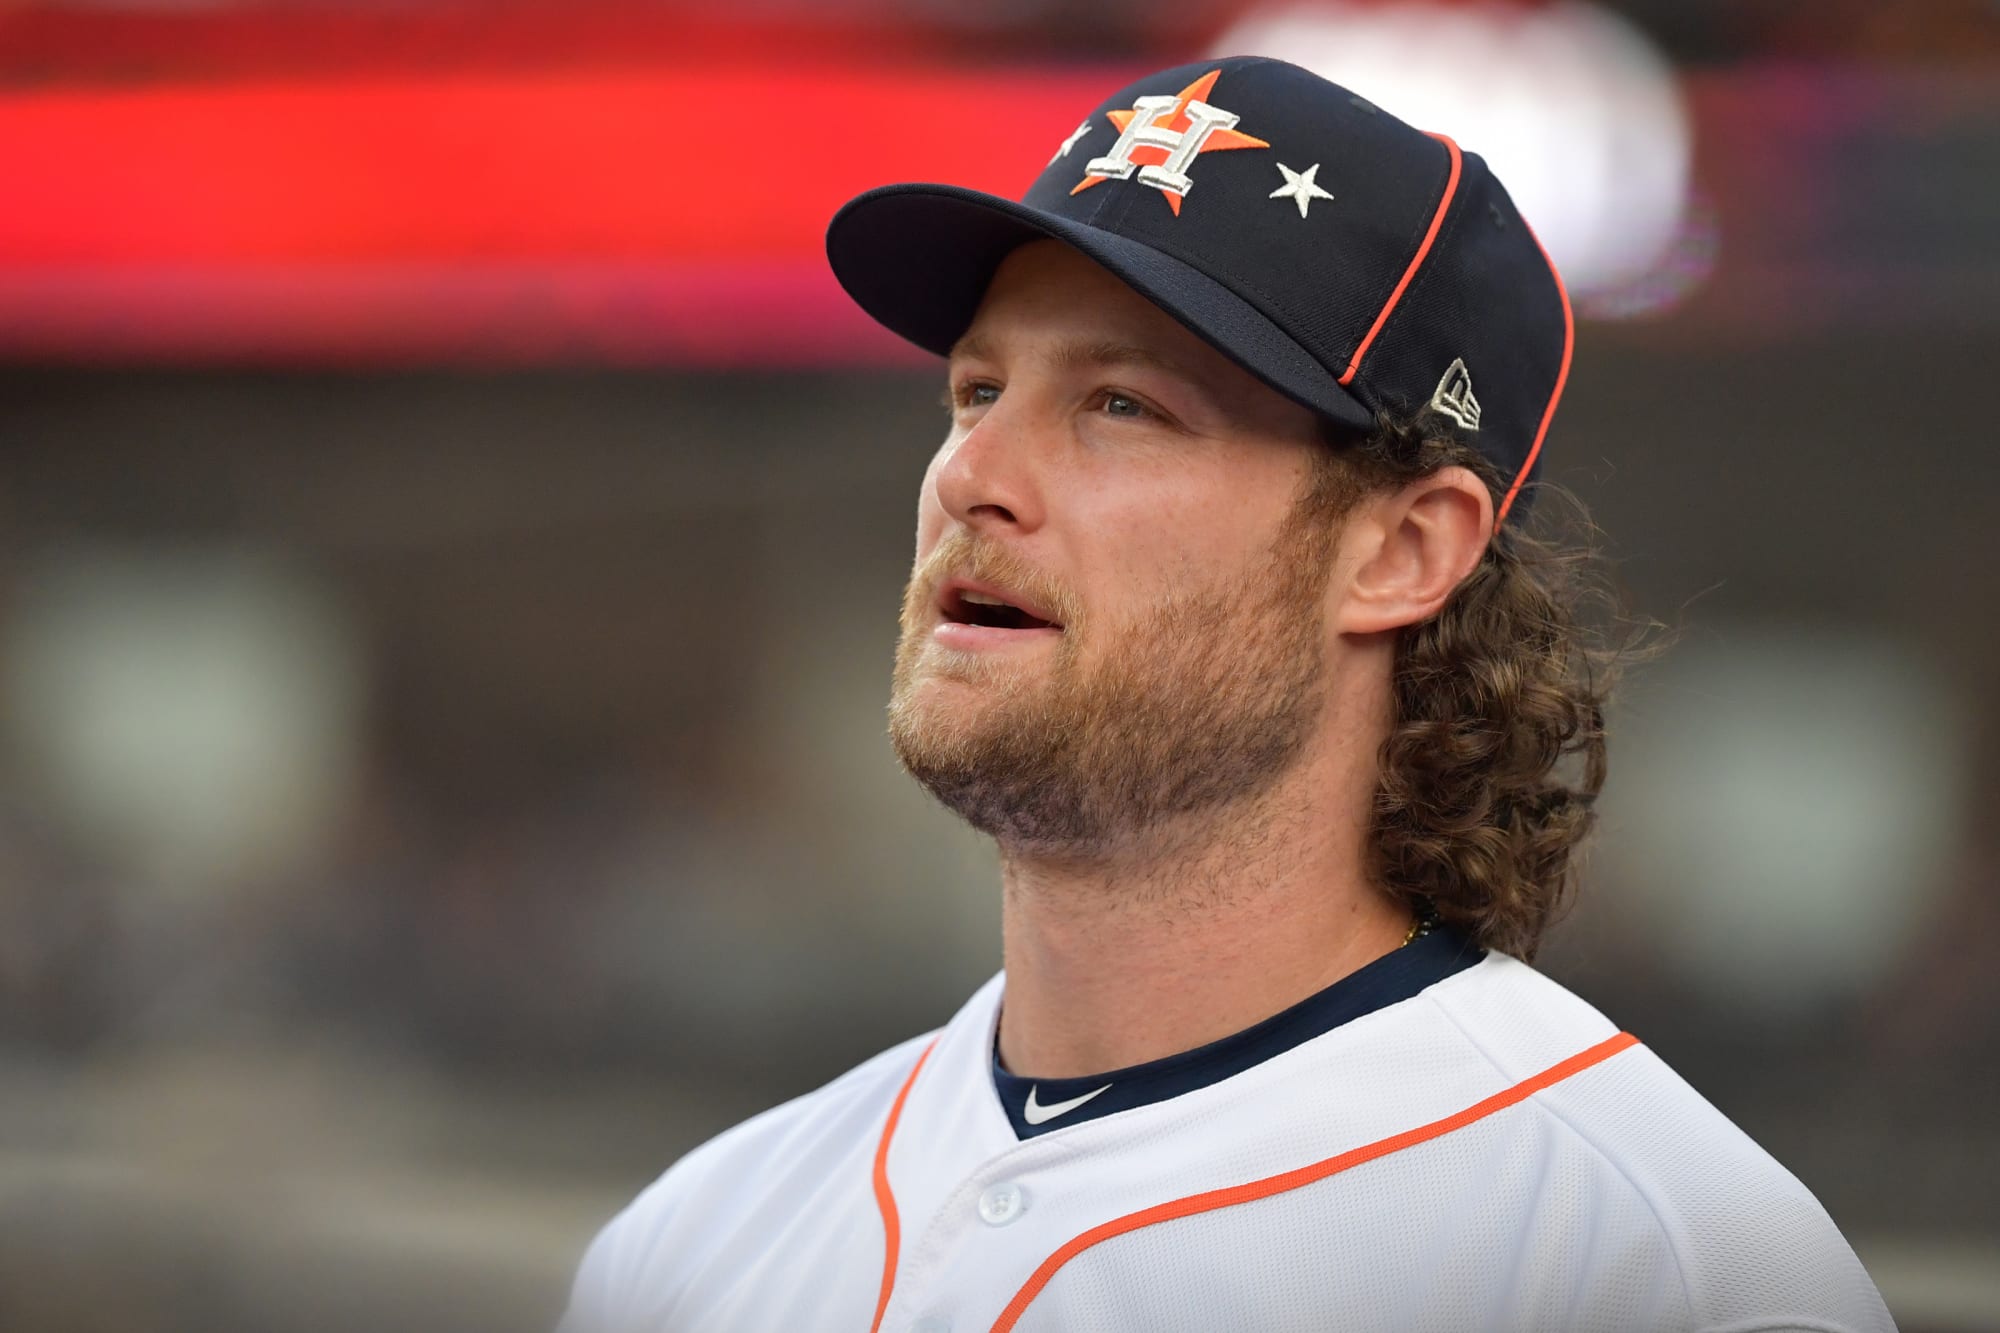 Houston Astros: It would be sacrilegious if Gerrit Cole signs with